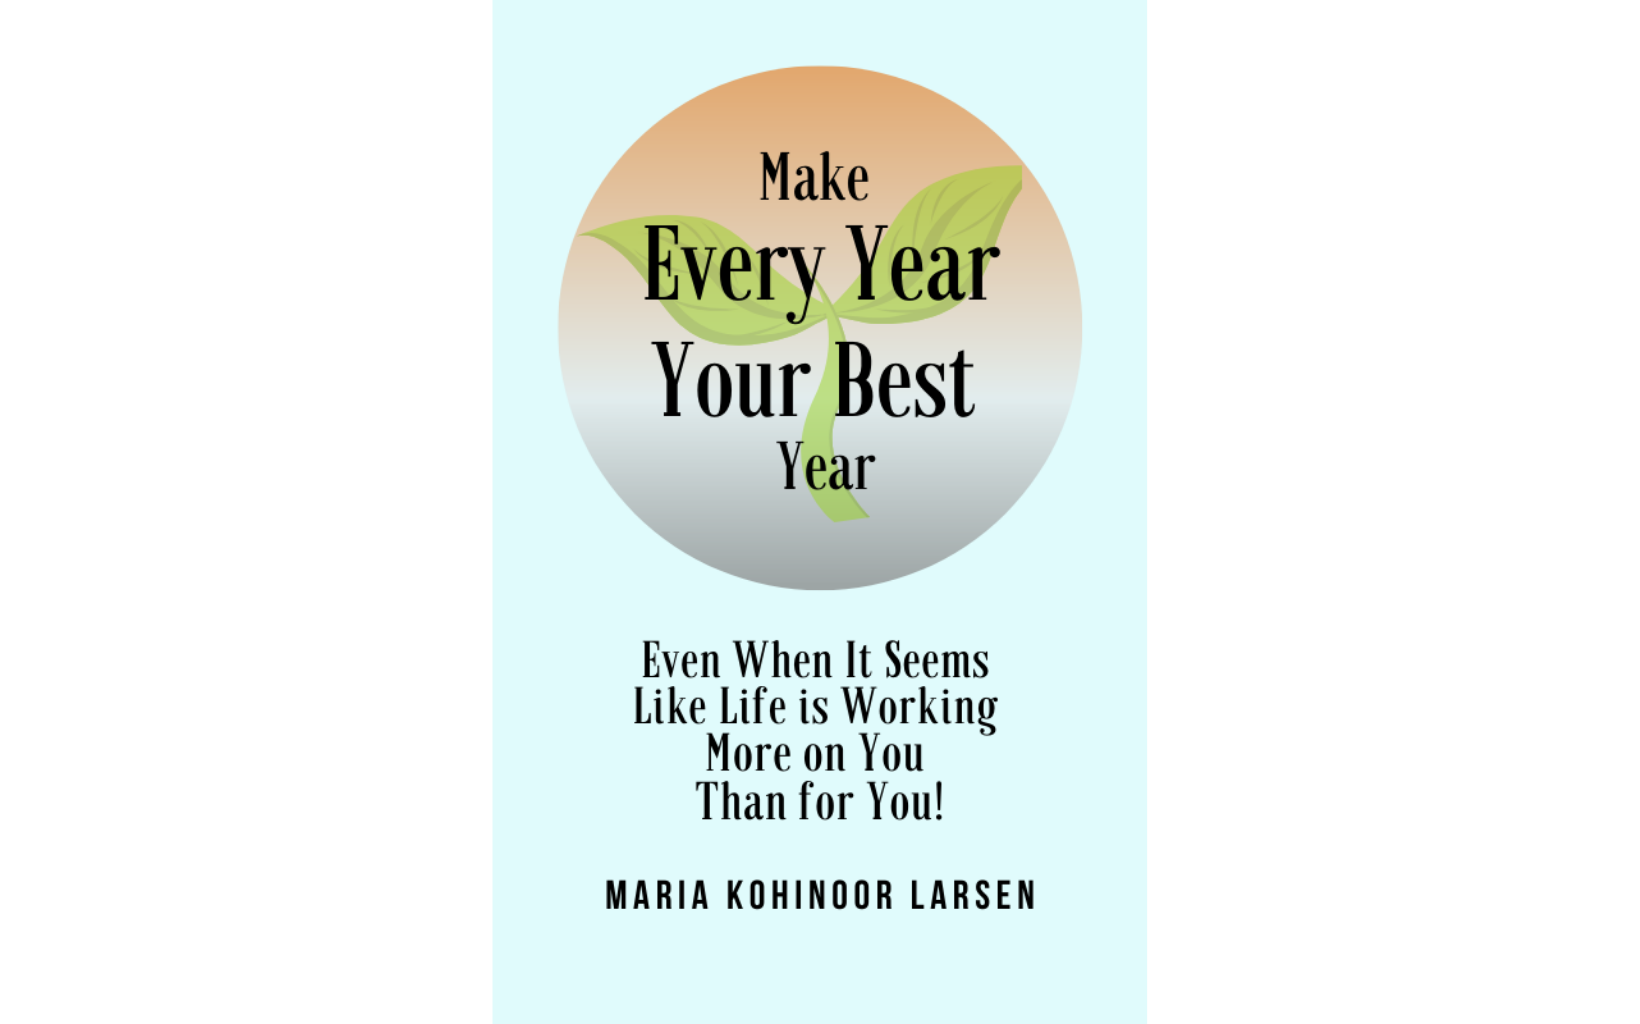 Make Every Year Your Best Year